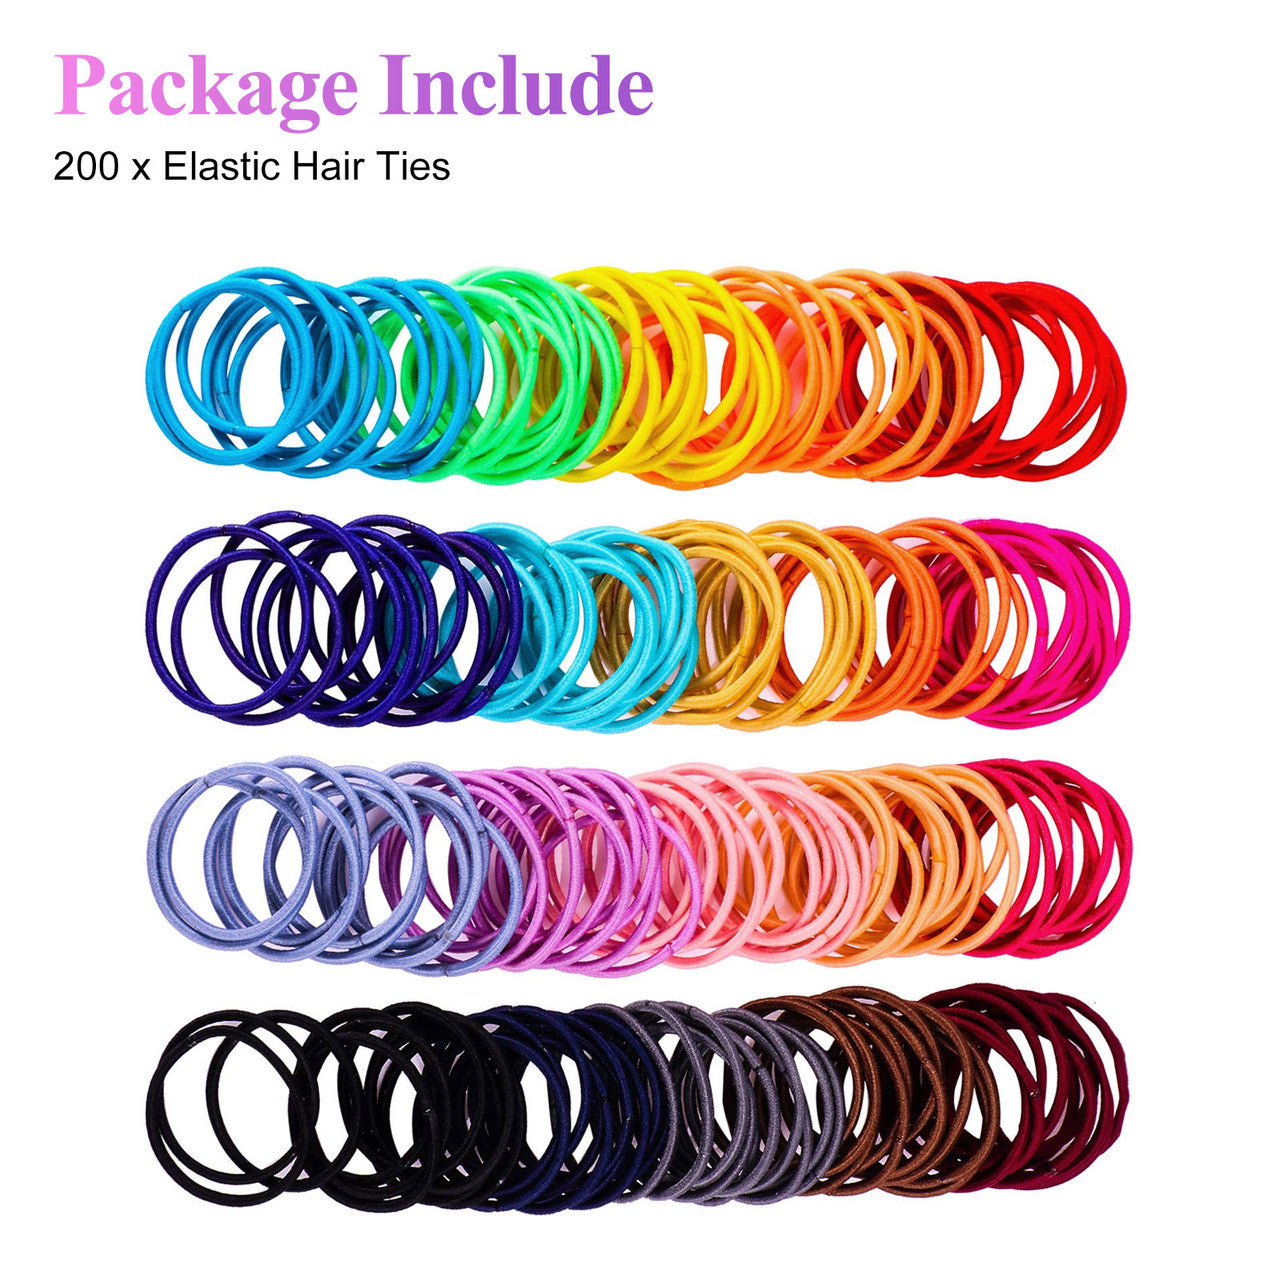 200 Elastic Hair Ties 20 Colors - Ready for All Occassions Girls Teens Adults Women